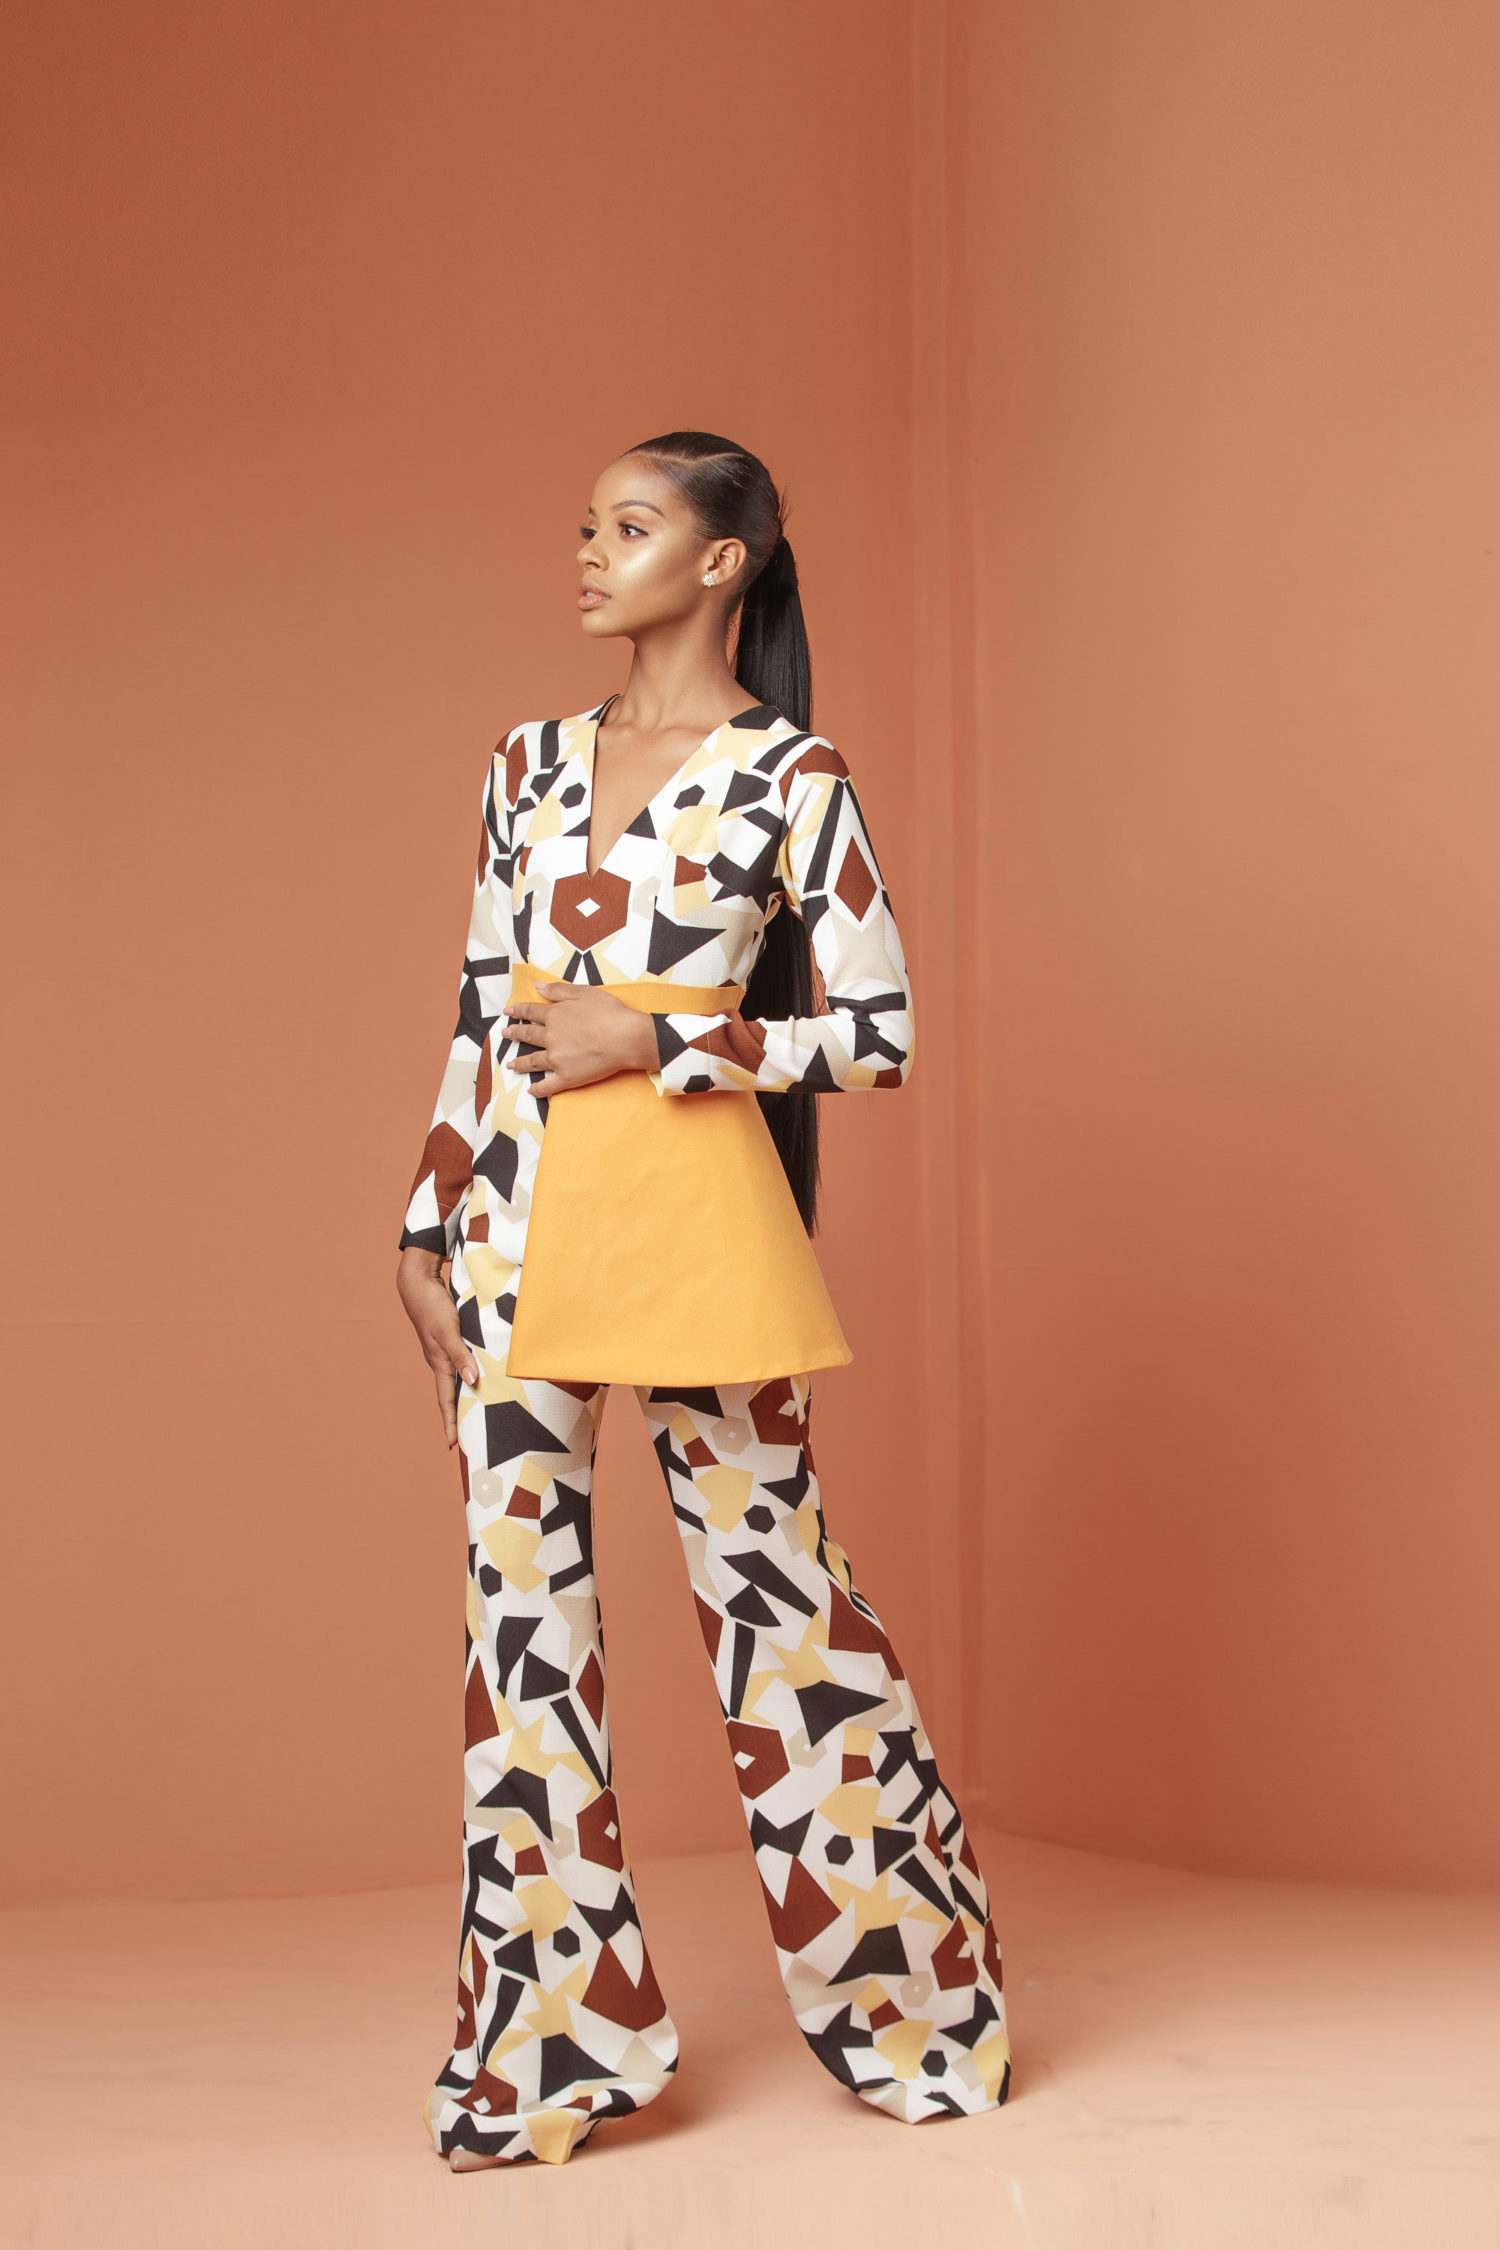 Knanfe: The New Uber-Chic Brand You’ll Actually Love